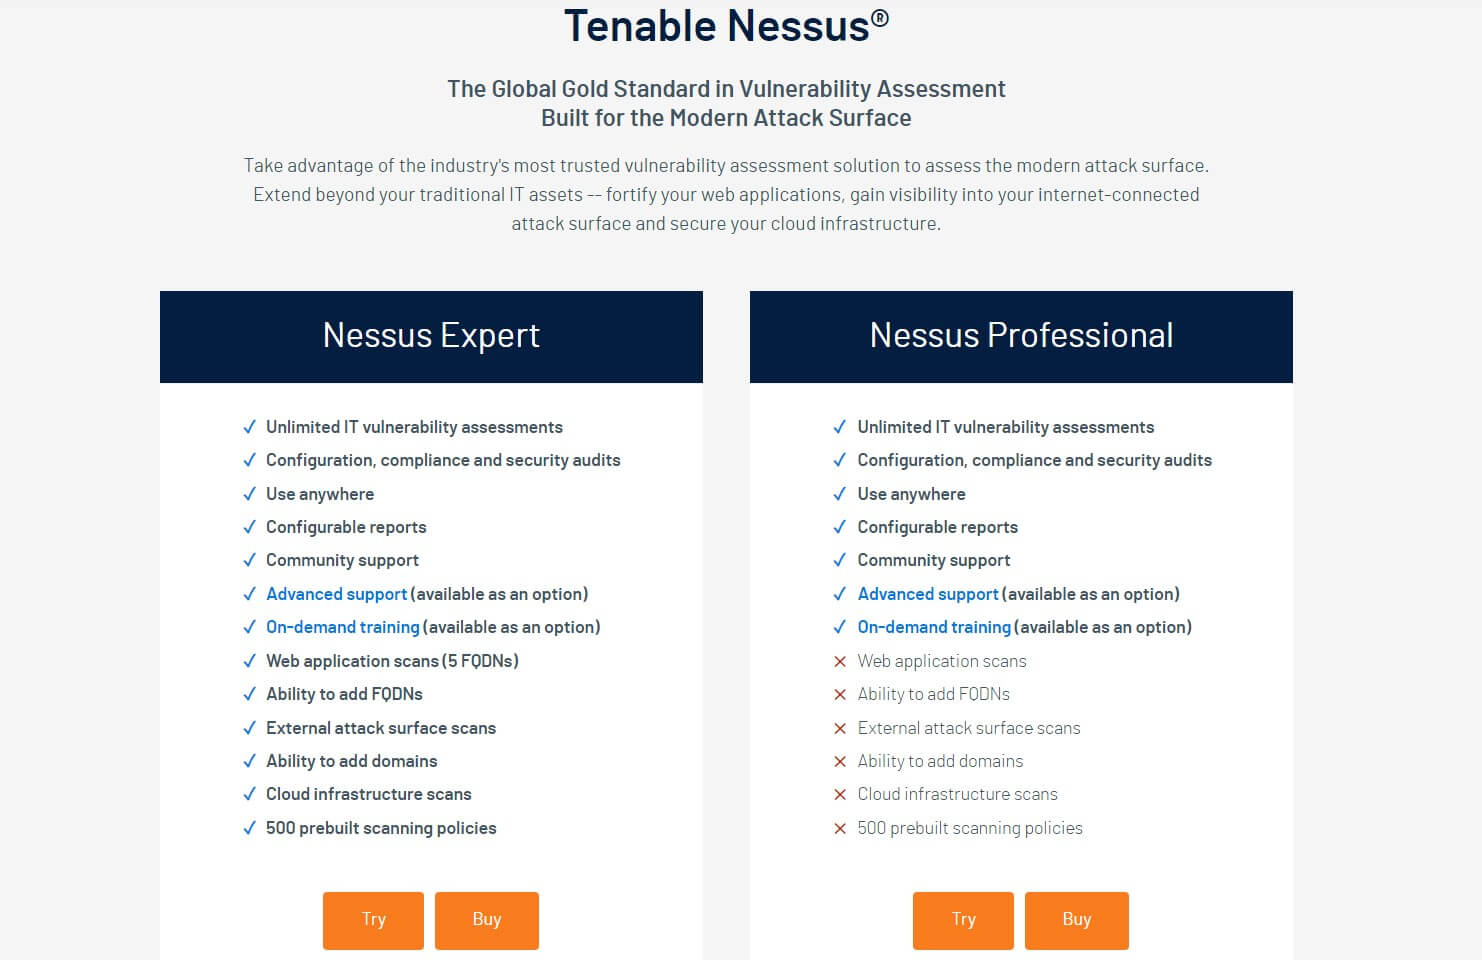 Comparison chart of Tenable Nessus Expert and Professional services, detailing features for IT vulnerability assessments and security audits.